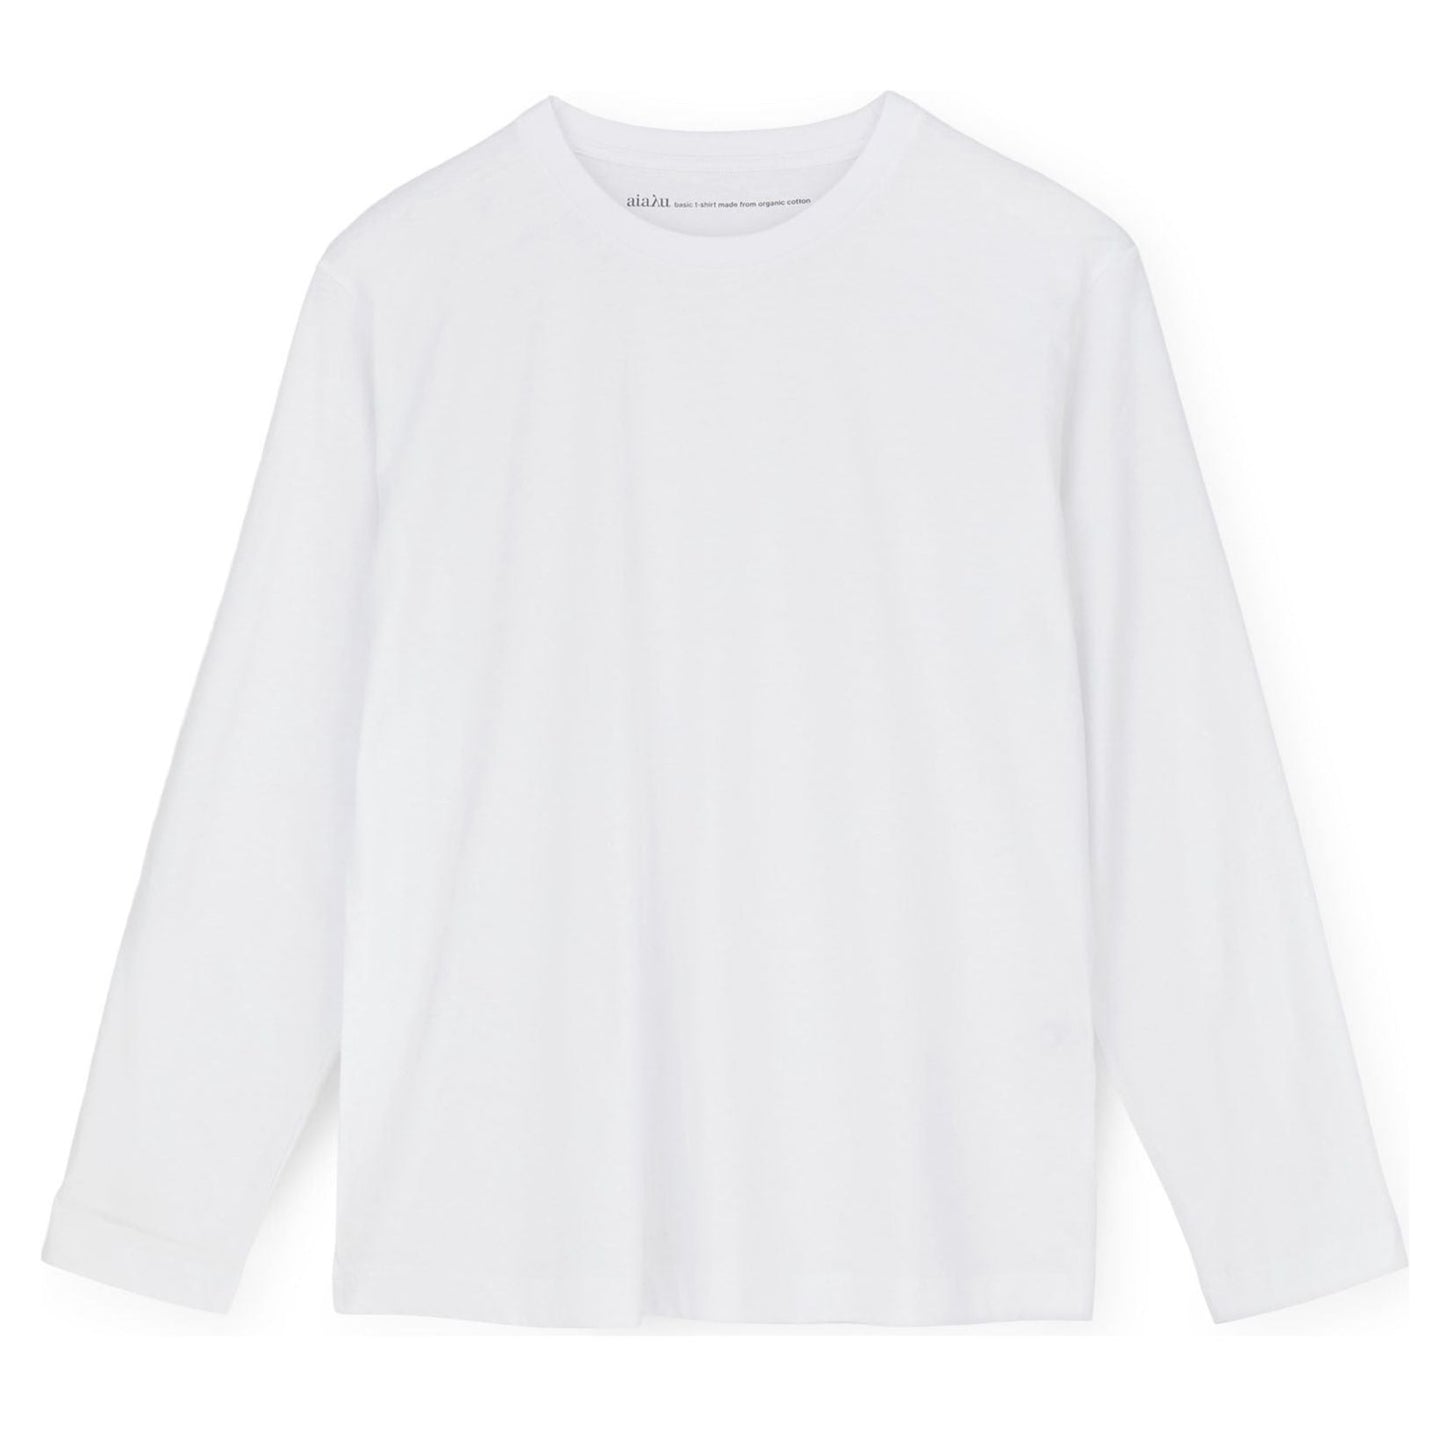 Aiayu W L/S Tshirt LS Two Pack, White & Undyed